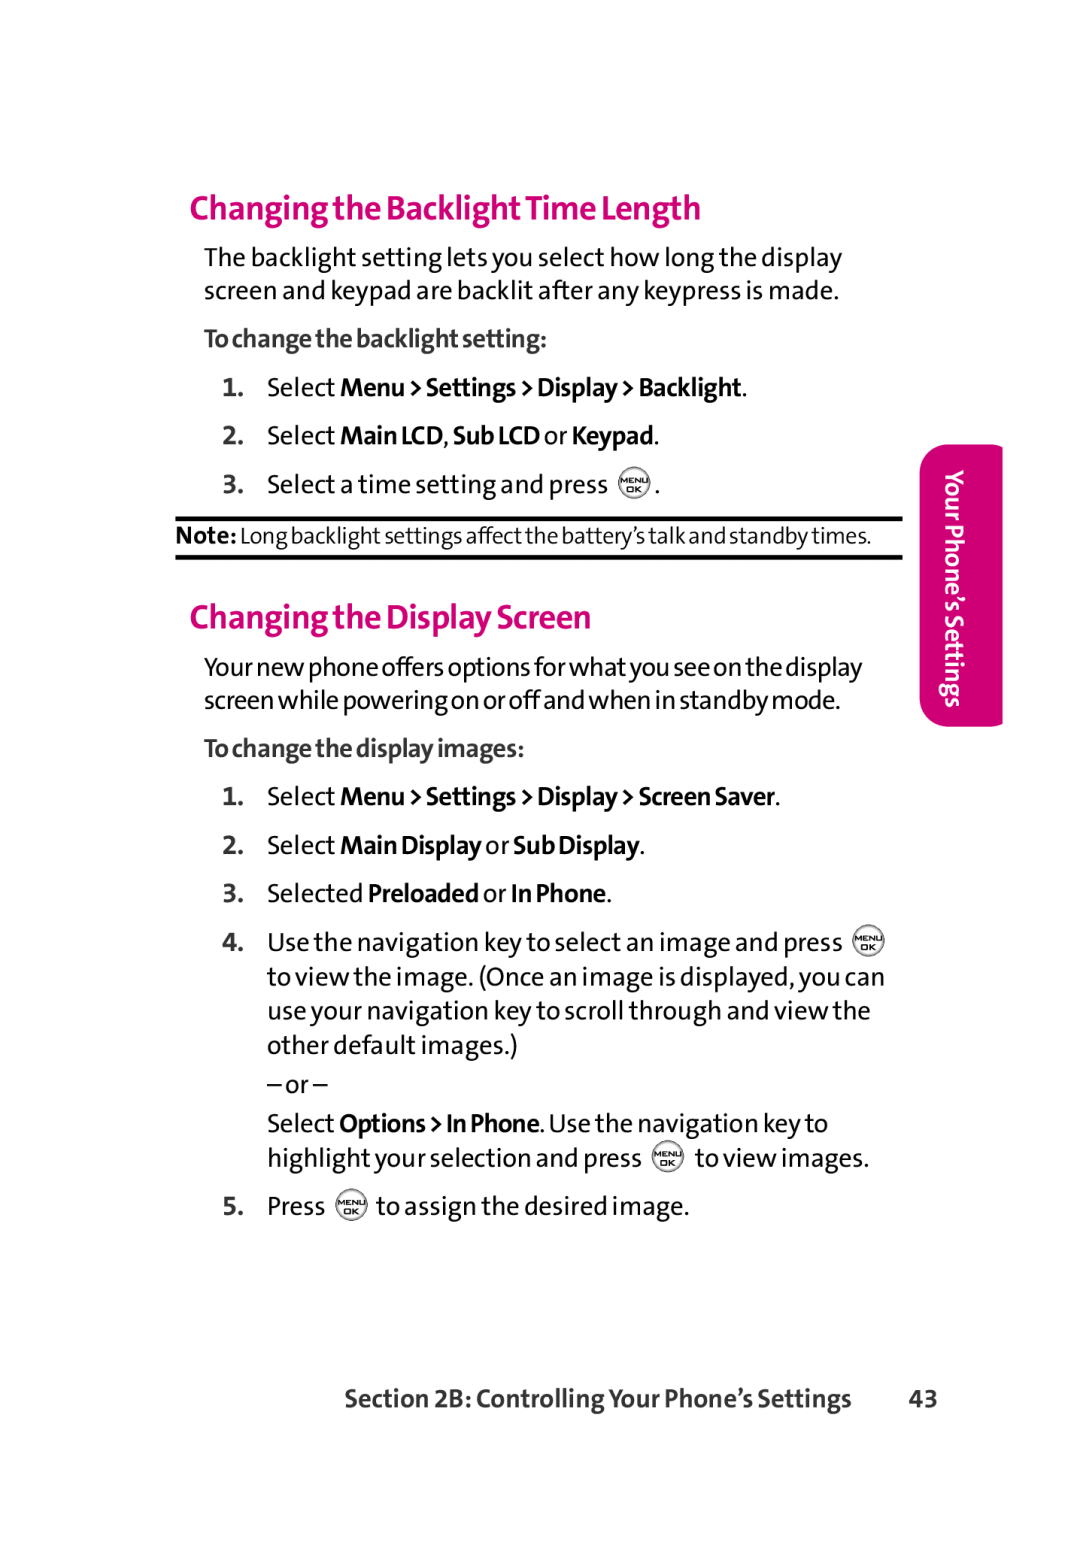 LG Electronics 350 manual Changing the BacklightTime Length, Changing the Display Screen, Tochangethebacklightsetting 